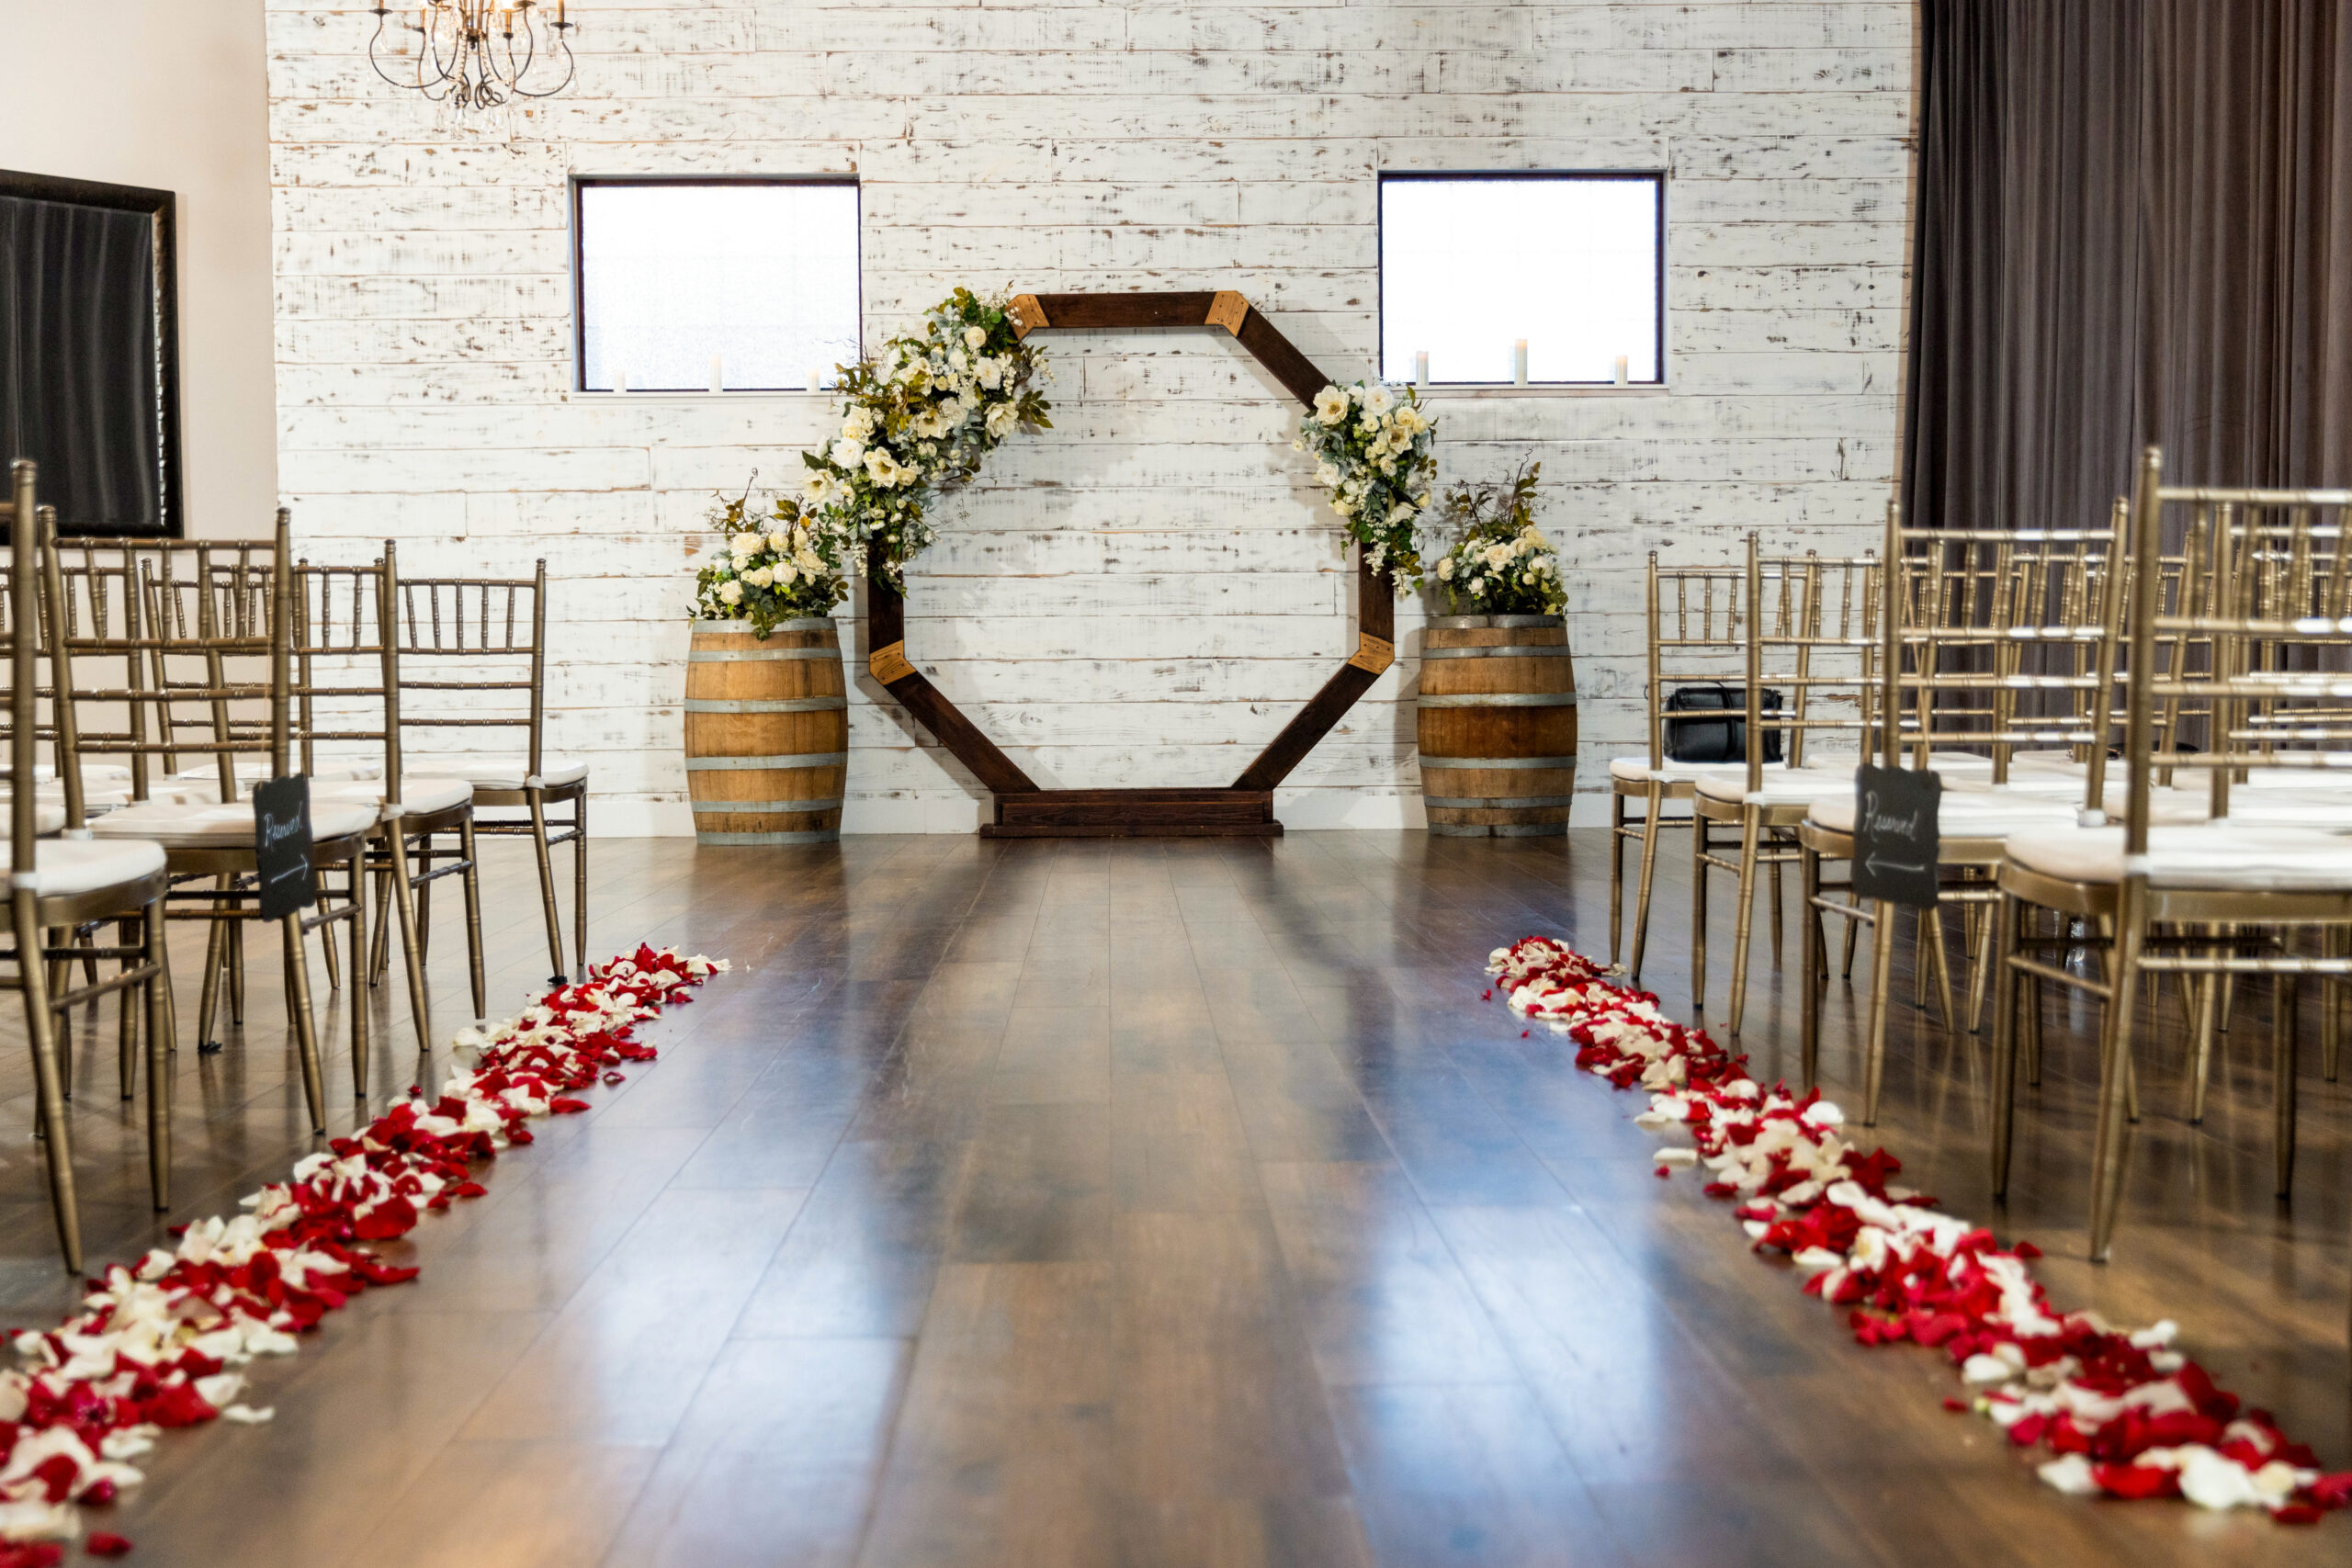 "Mara Villa's charming reception area with rustic touches, wooden accents, and beautiful floral arrangements."